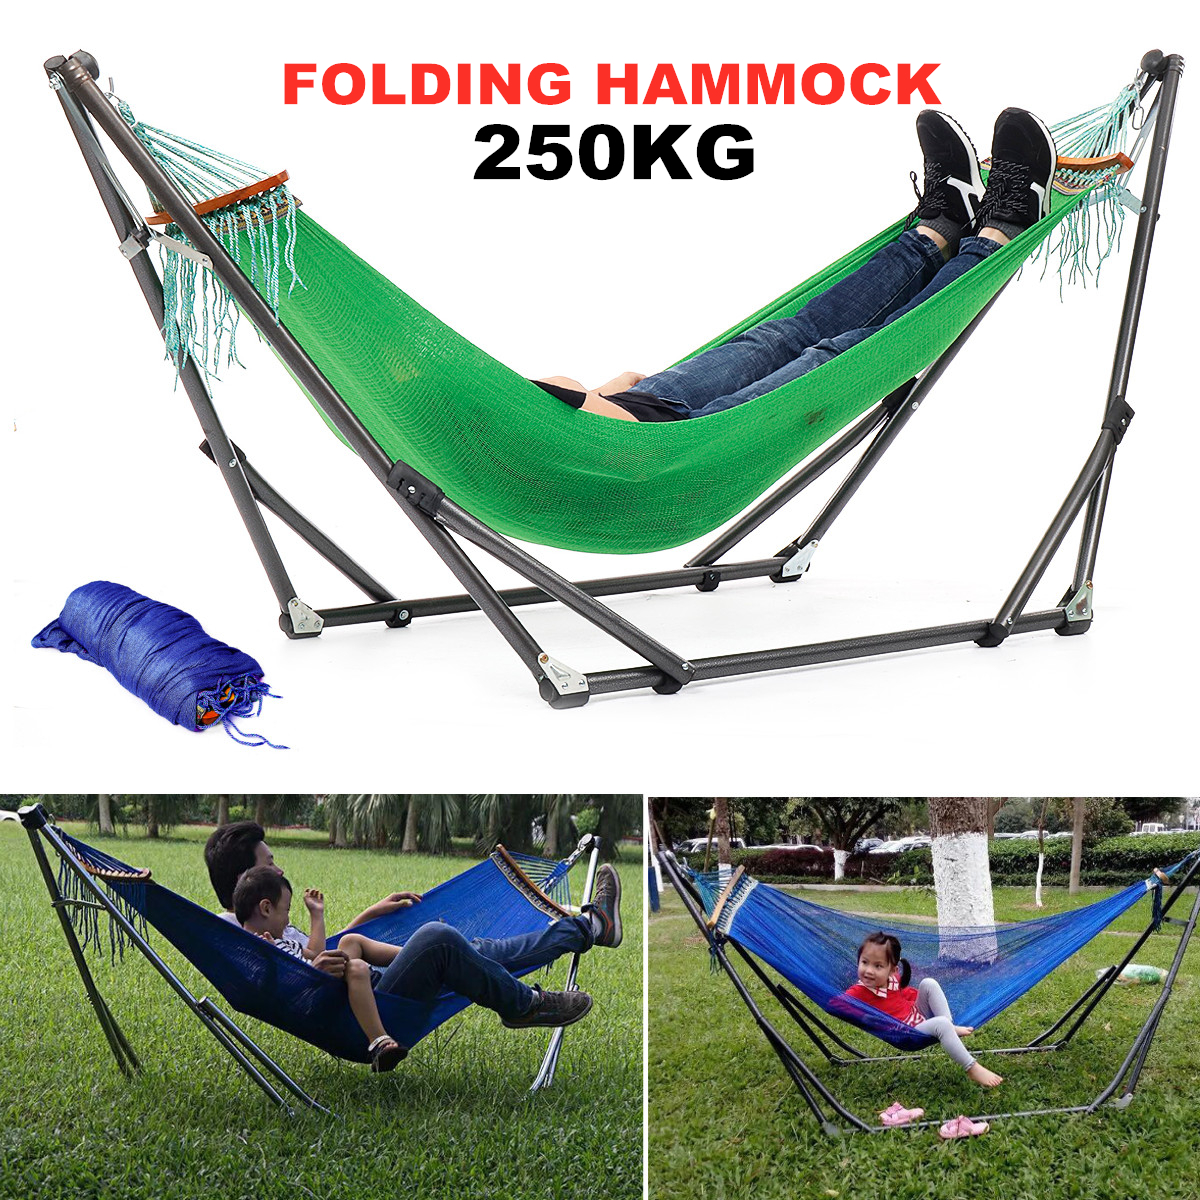 Portable Canvas Hammock Stand Portable Multifunctional Practical Outdoor Garden Swing Hammock Single Hanging Chair Bed Leisure Camping Travel 29